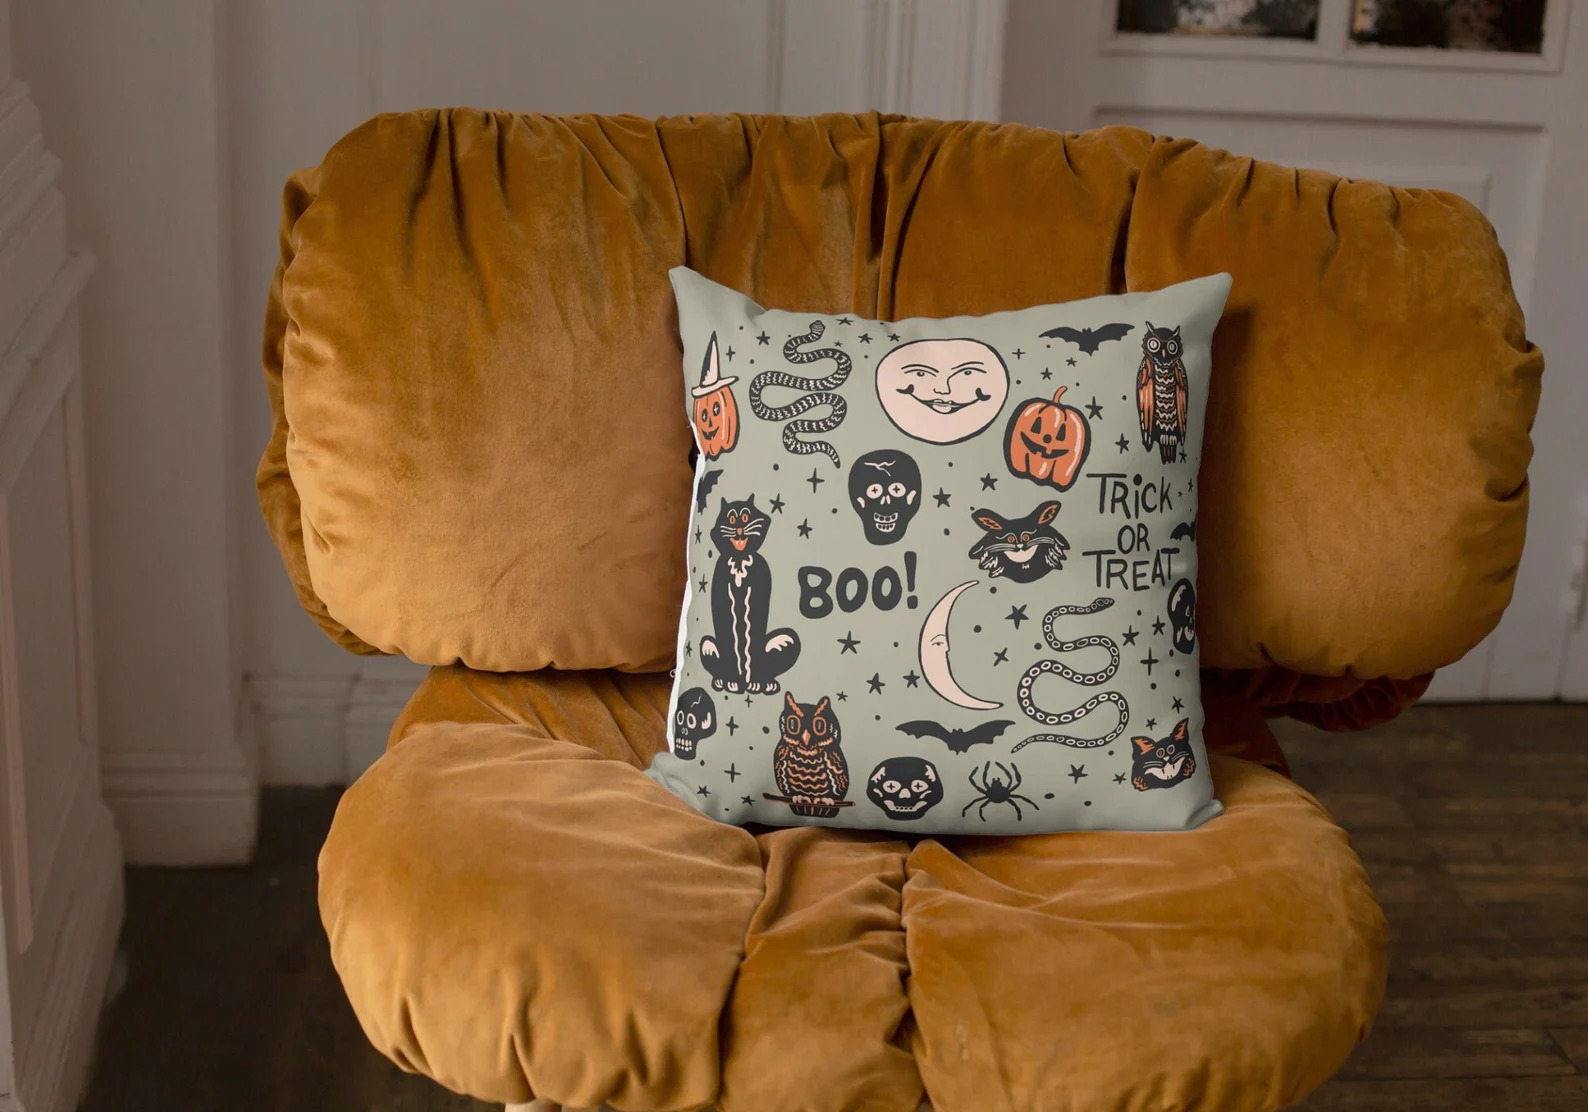 18 Fabulous Halloween Pillow Cover Ideas For Your Last-Minute Touch-up